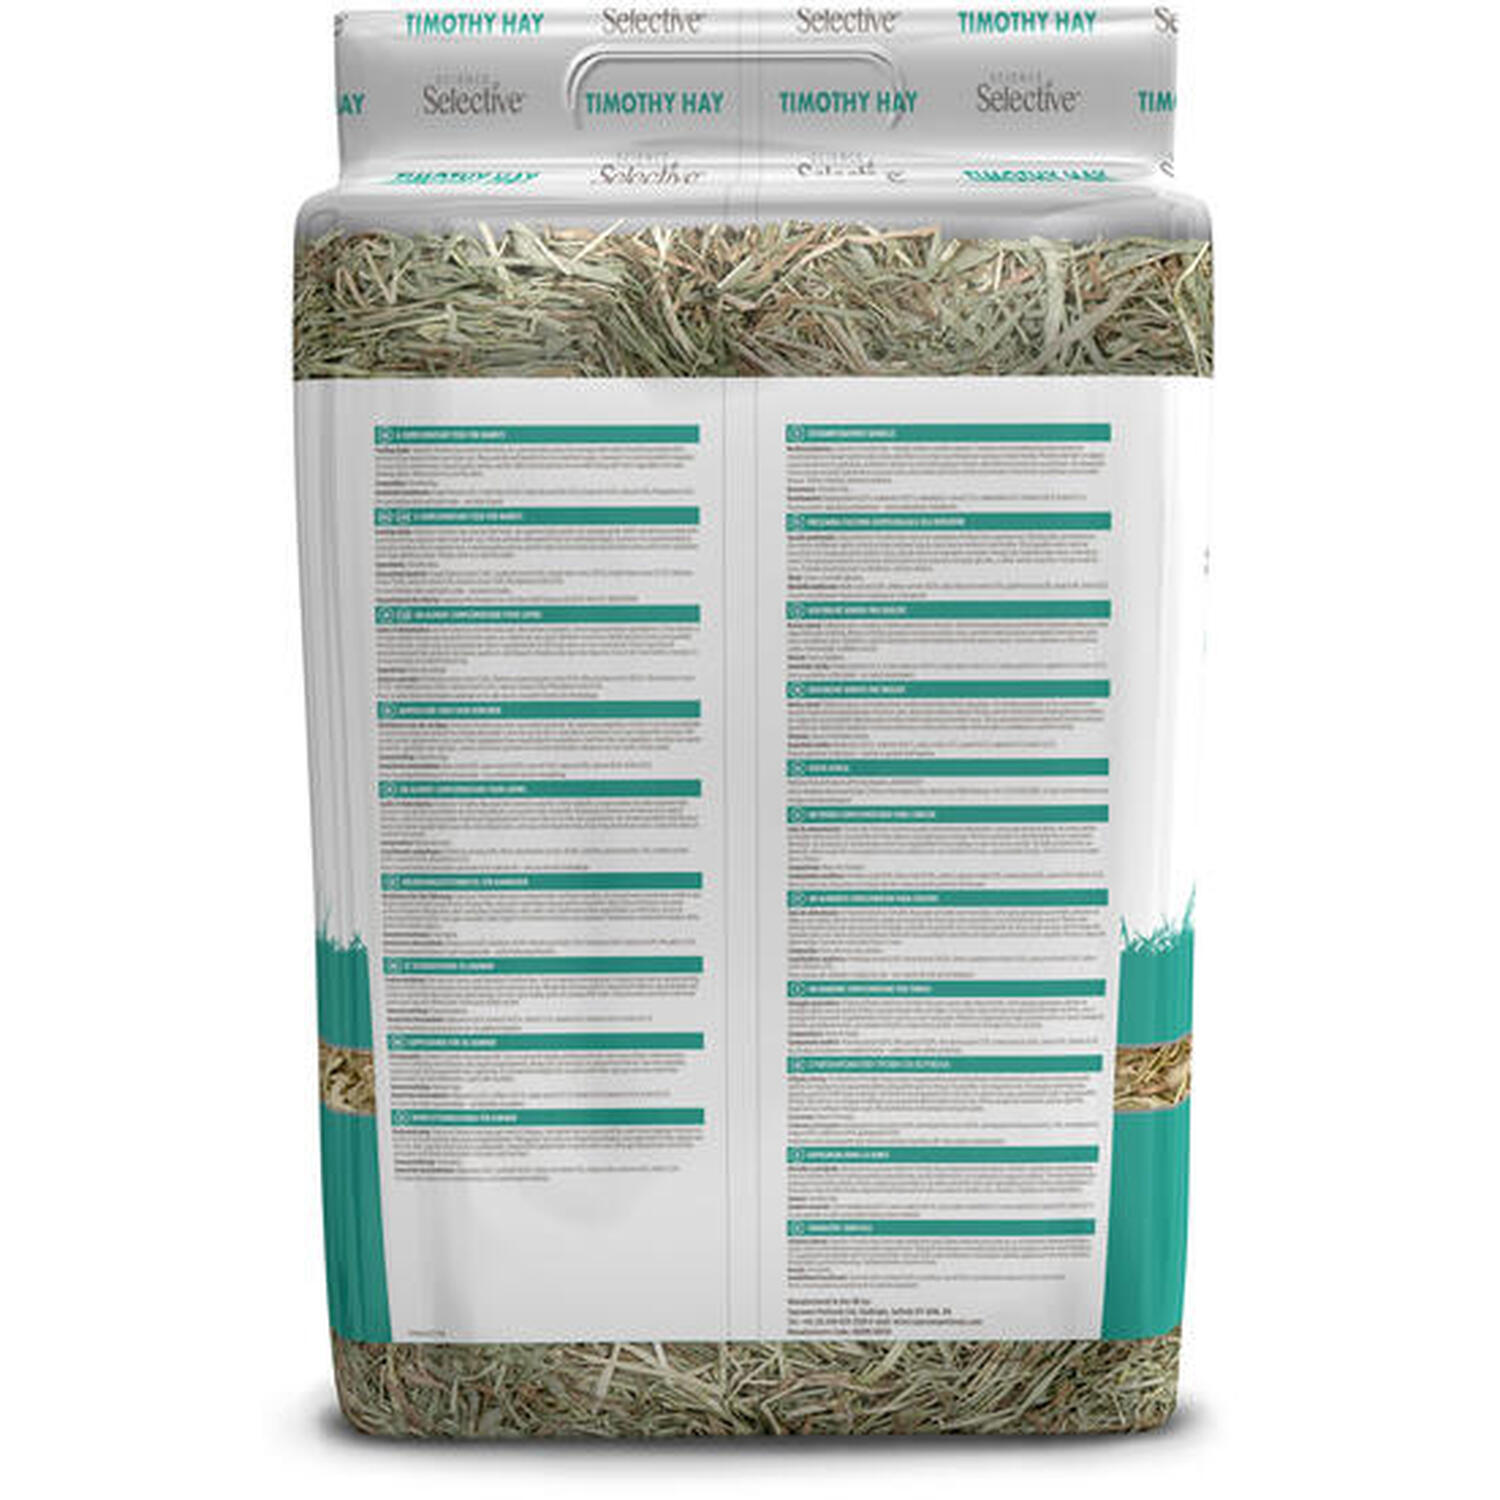 Science Selective Timothy Hay 1.5kg Image 2